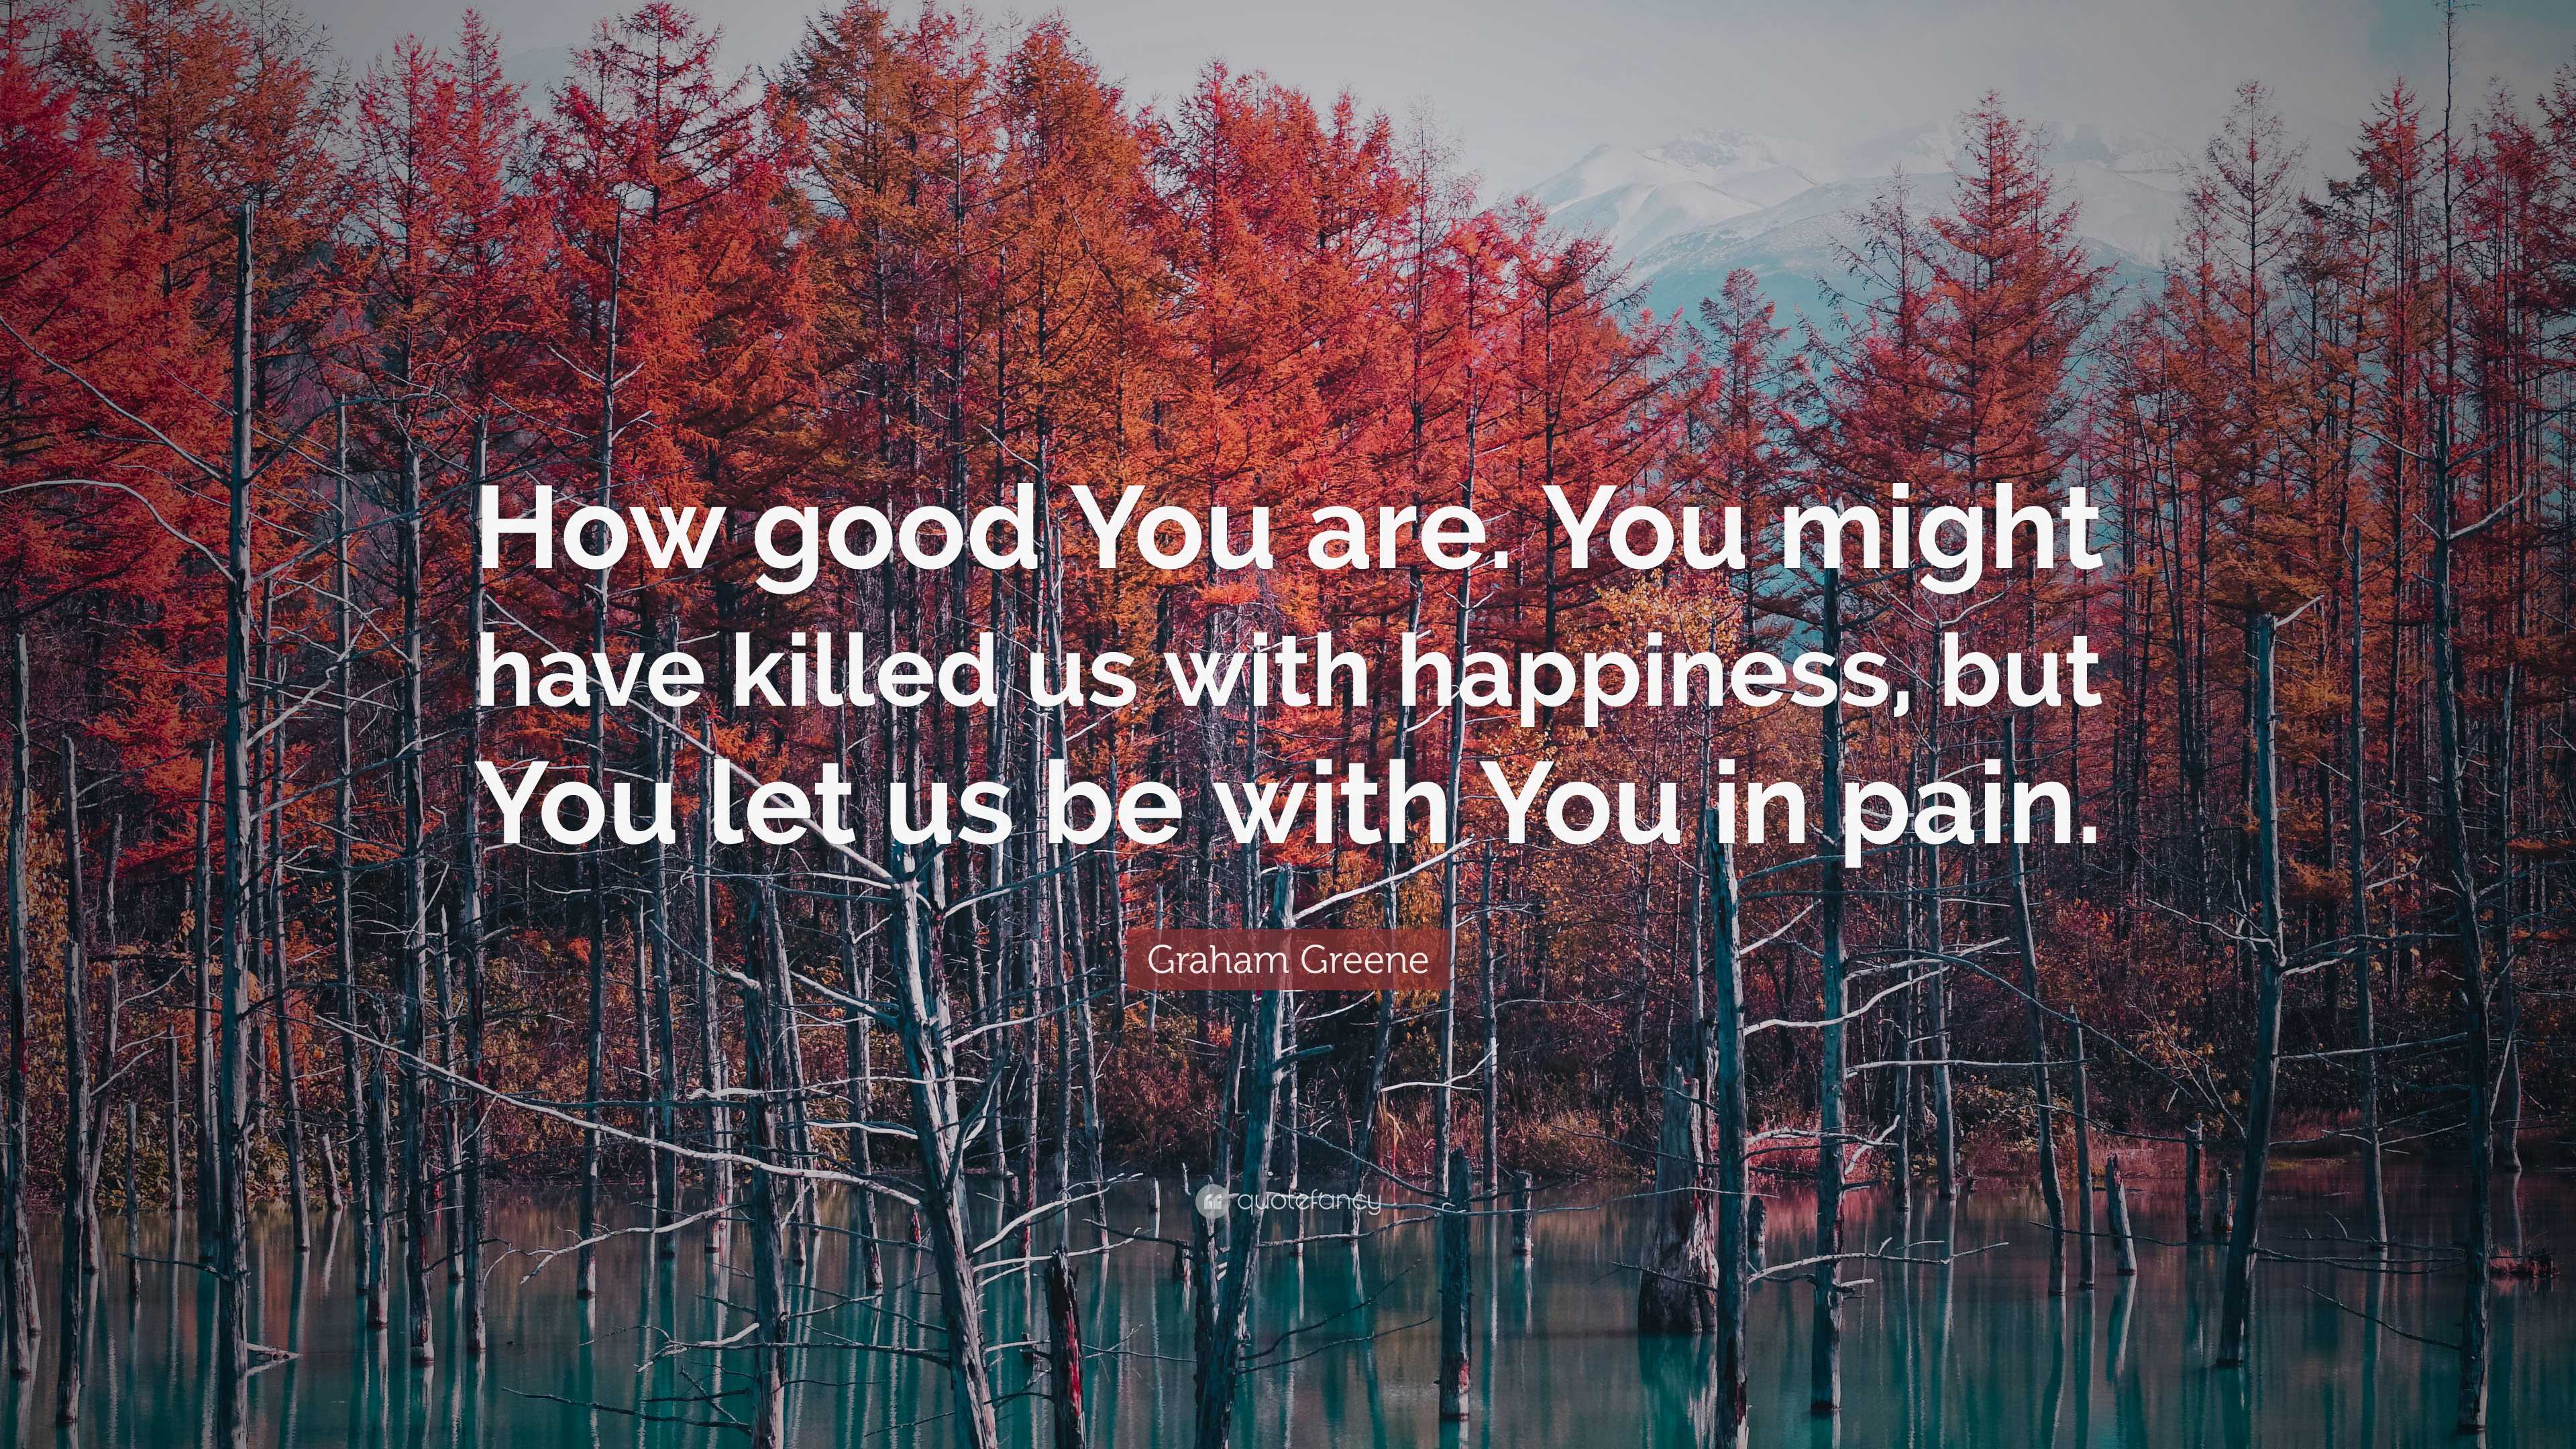 Graham Greene Quote: “How good You are. You might have killed us with ...